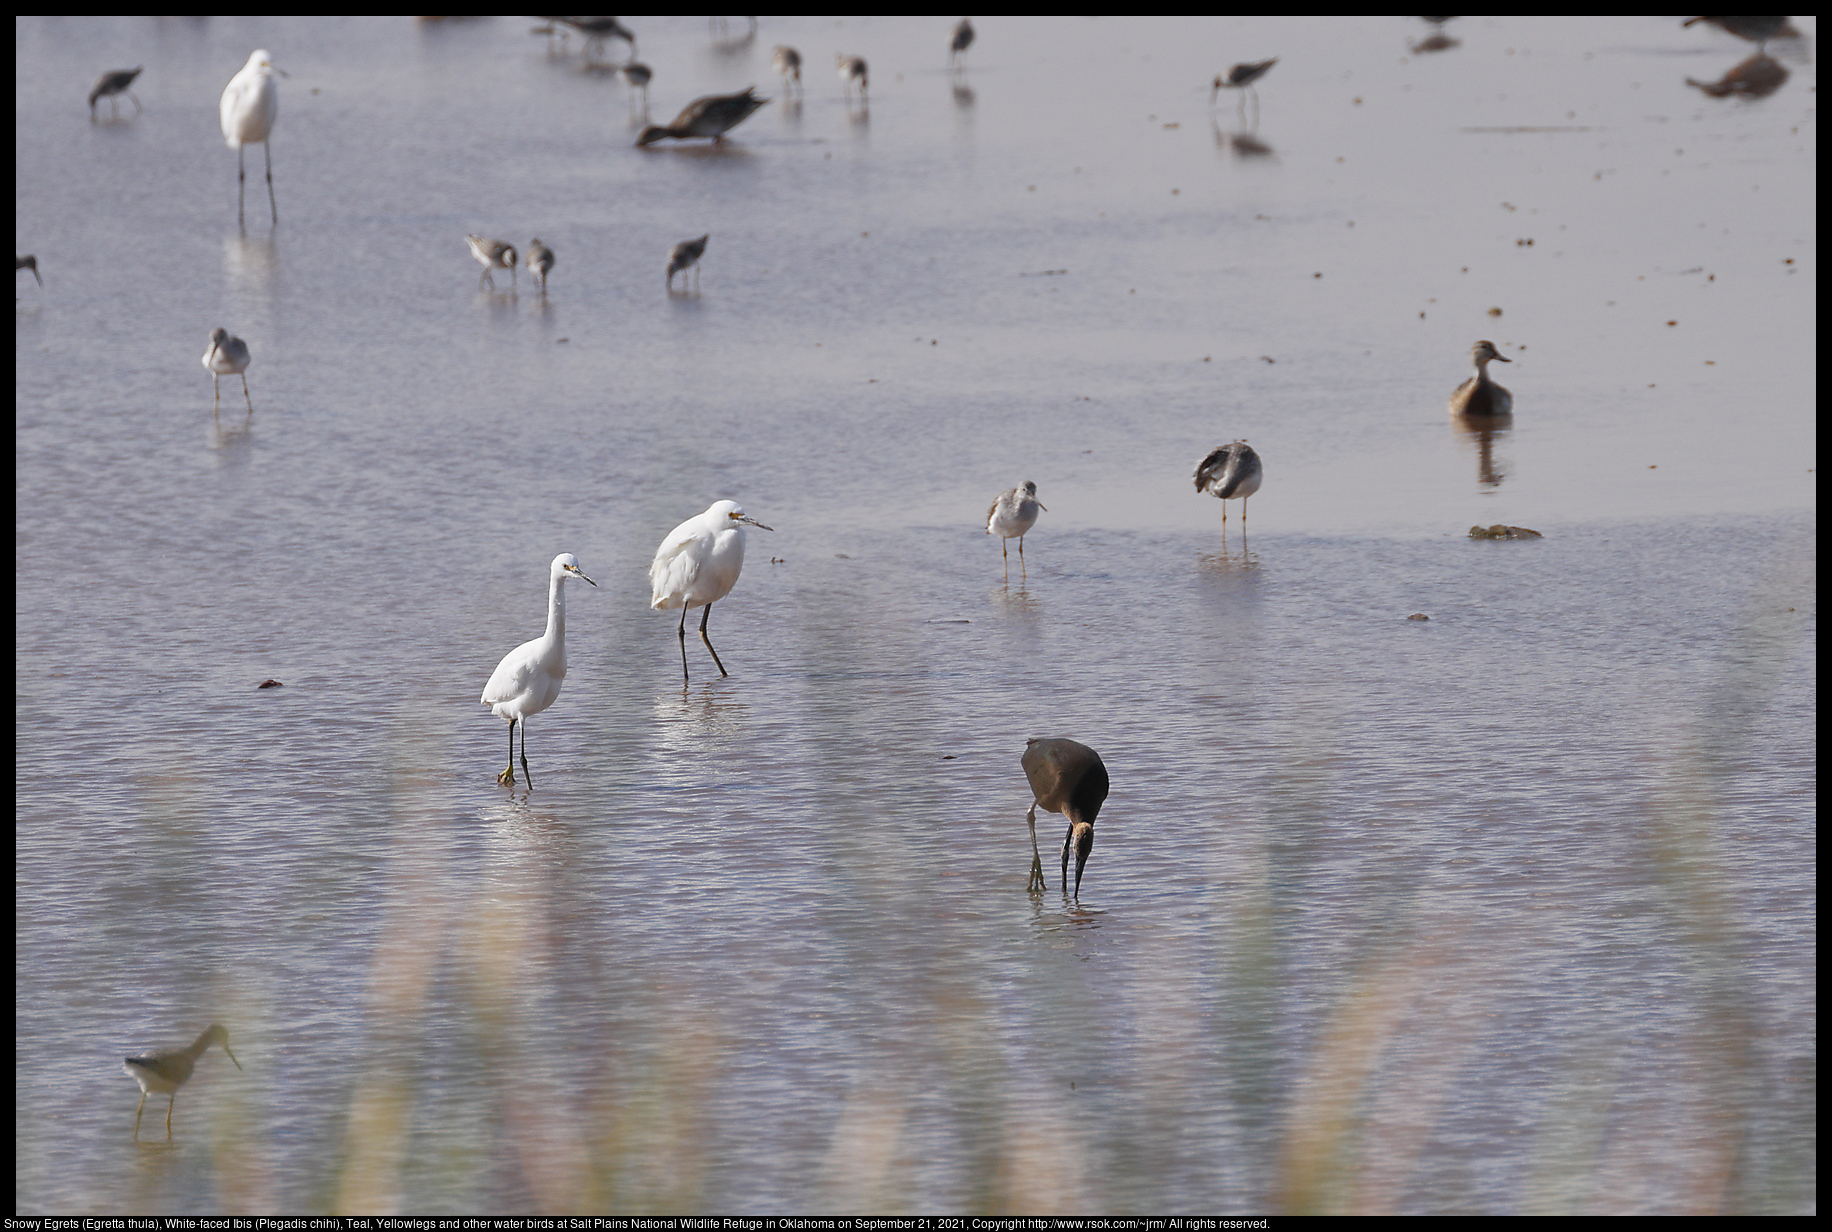 Snowy Egrets (Egretta thula), White-faced Ibis (Plegadis chihi), Teal, Yellowlegs and other water birds at Salt Plains National Wildlife Refuge in Oklahoma on September 21, 2021